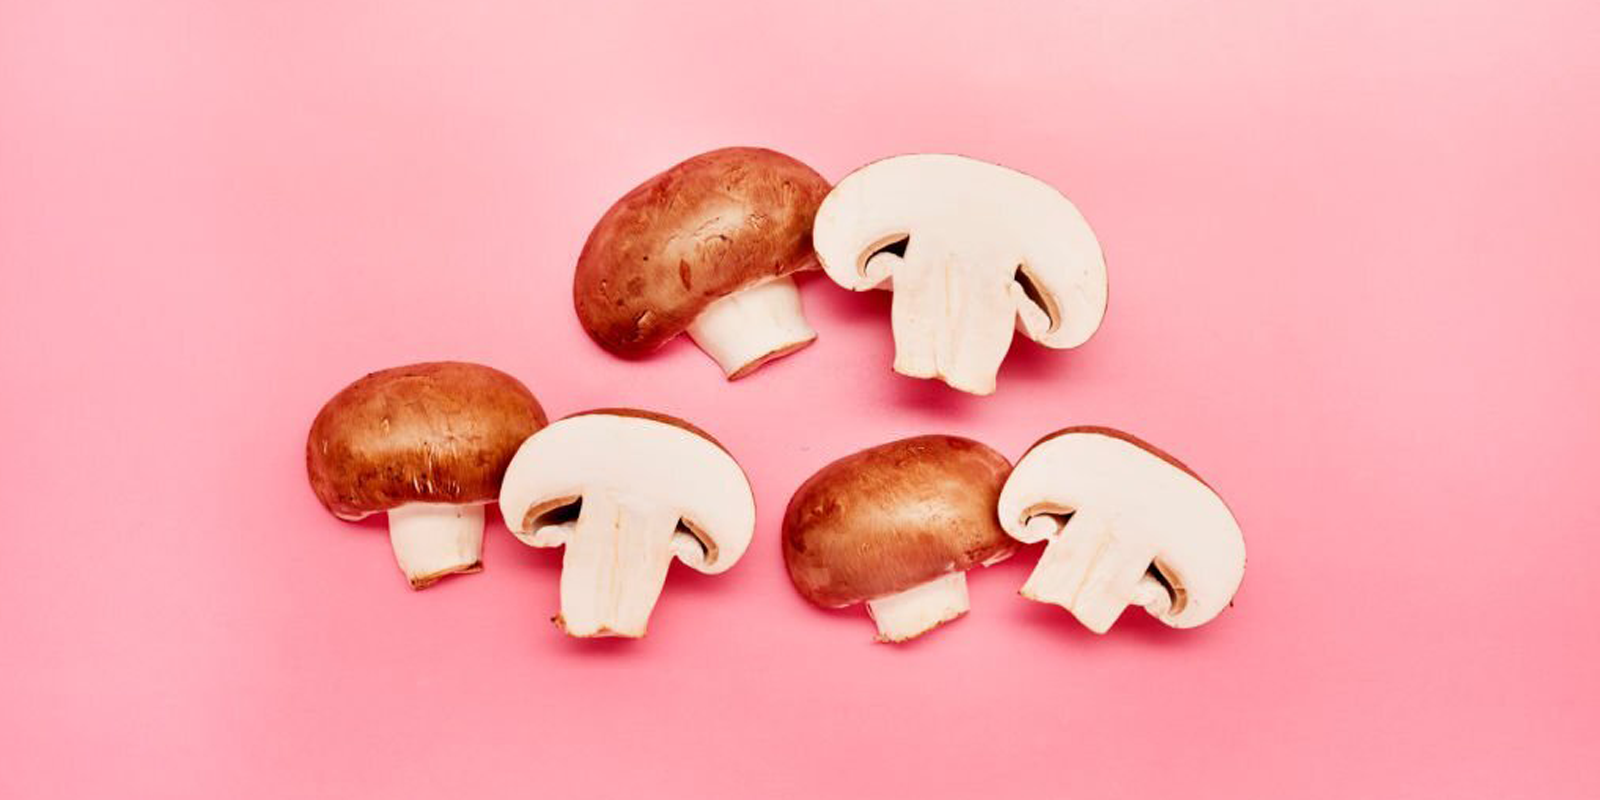 Is Mushroom Good For Weight Loss